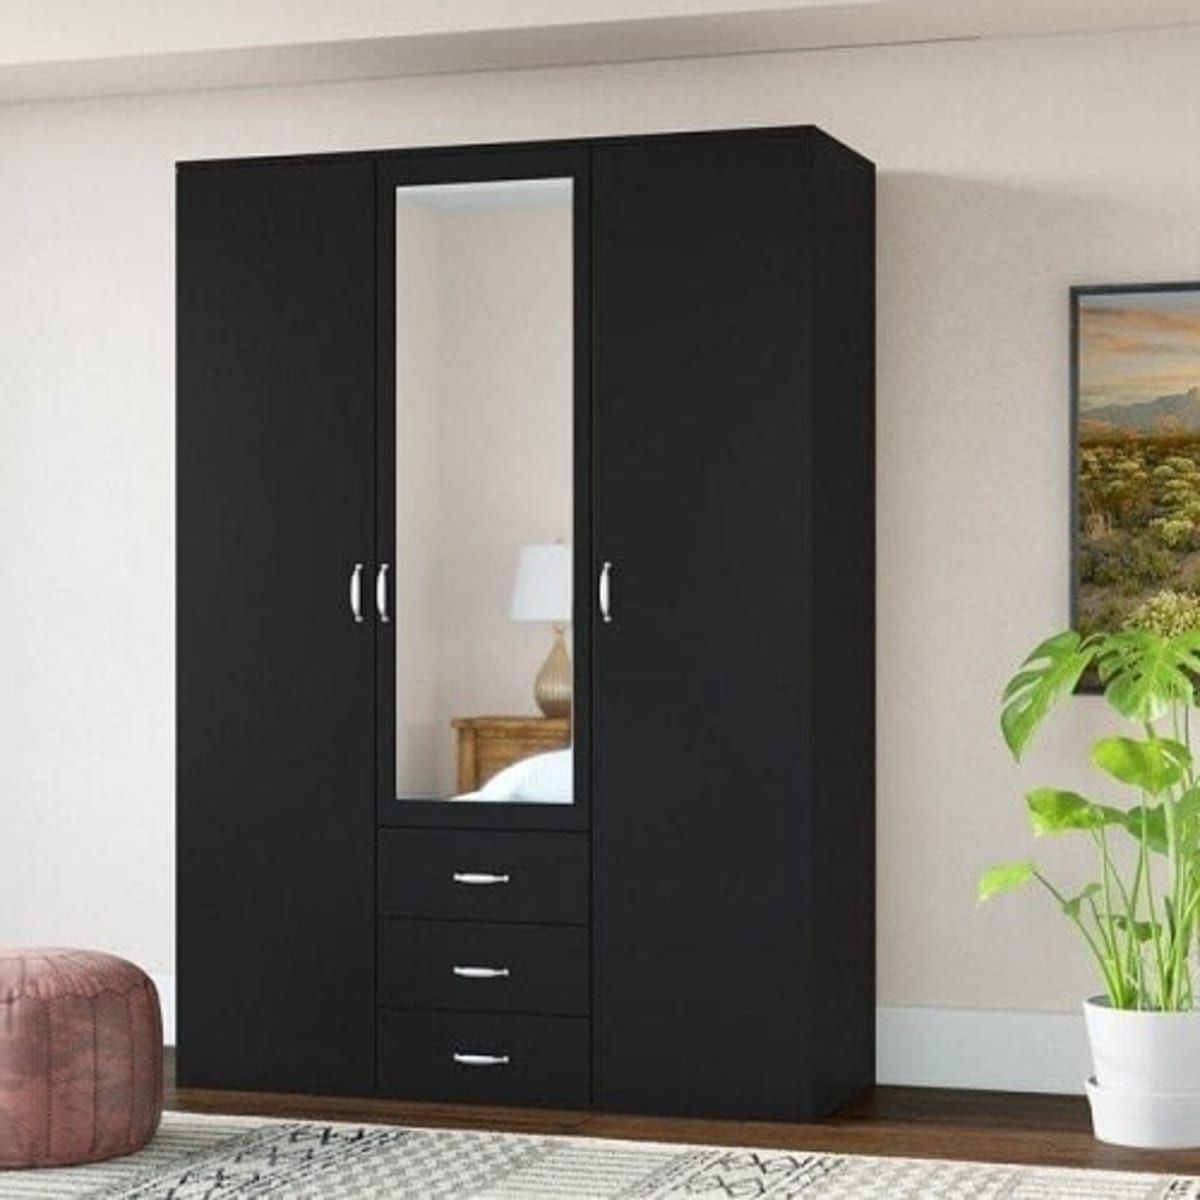 Beyond 3 Door Wardrobe With 3 Drawer And Mirror Black | Konga Online  Shopping Inside Wardrobes With 3 Drawers (Gallery 7 of 20)